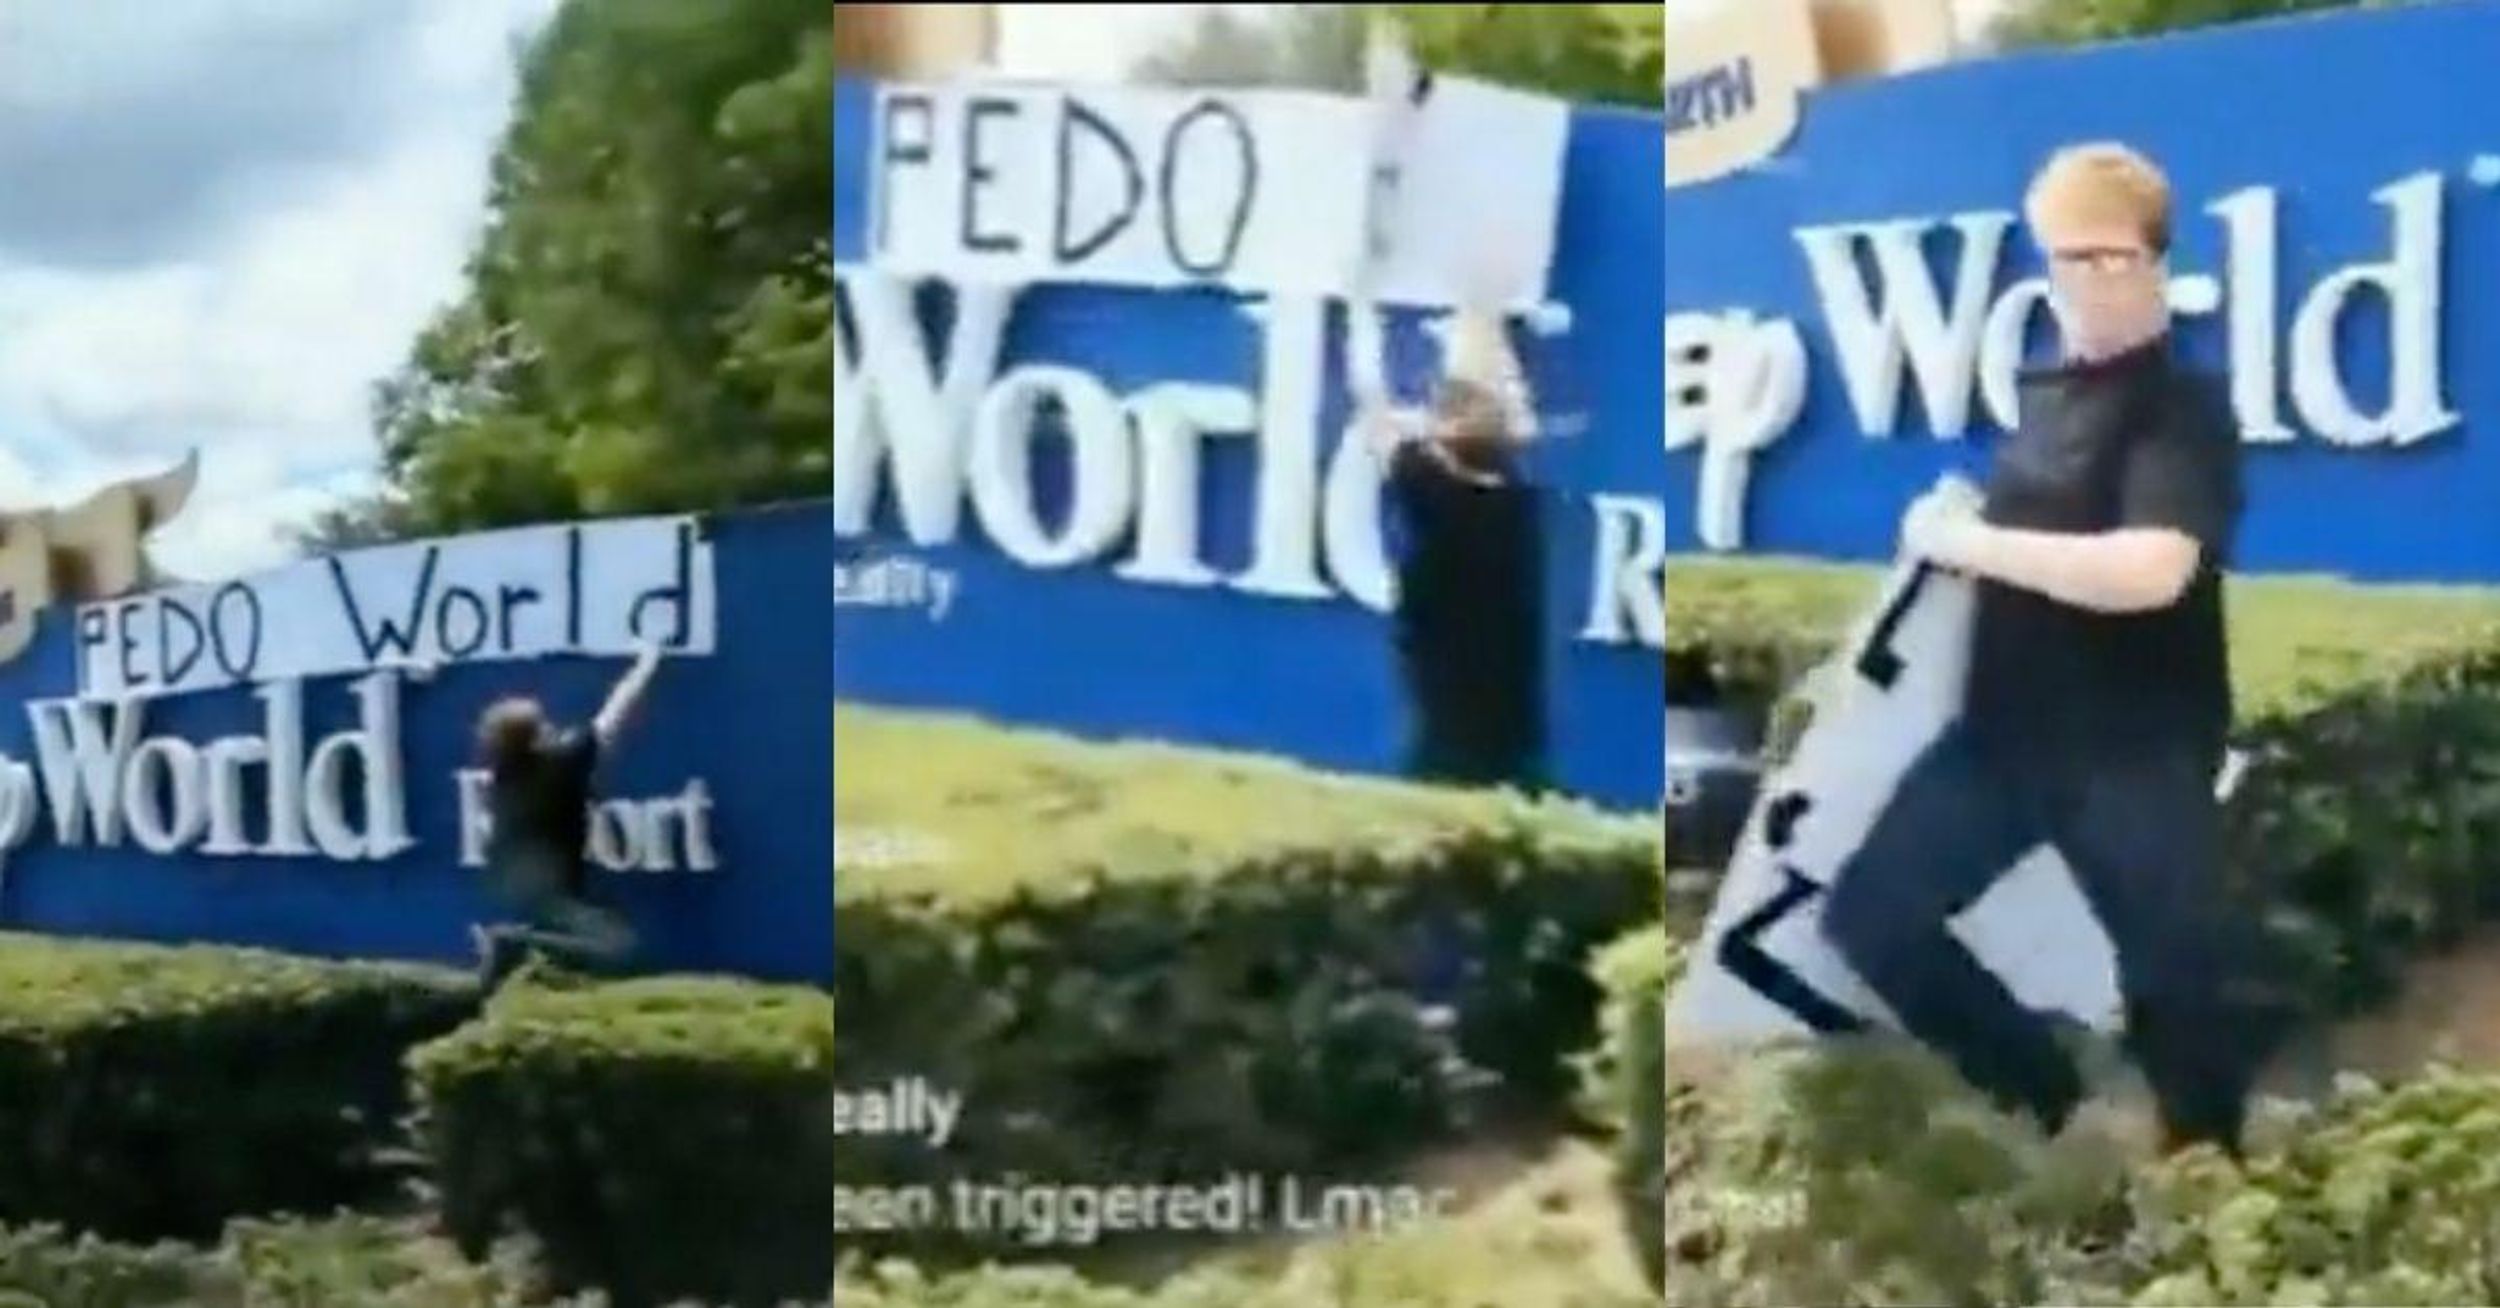 Anti-Gay Protesters Throw Tantrum After Woman Rips Down Their 'Pedo World' Sign At Disney